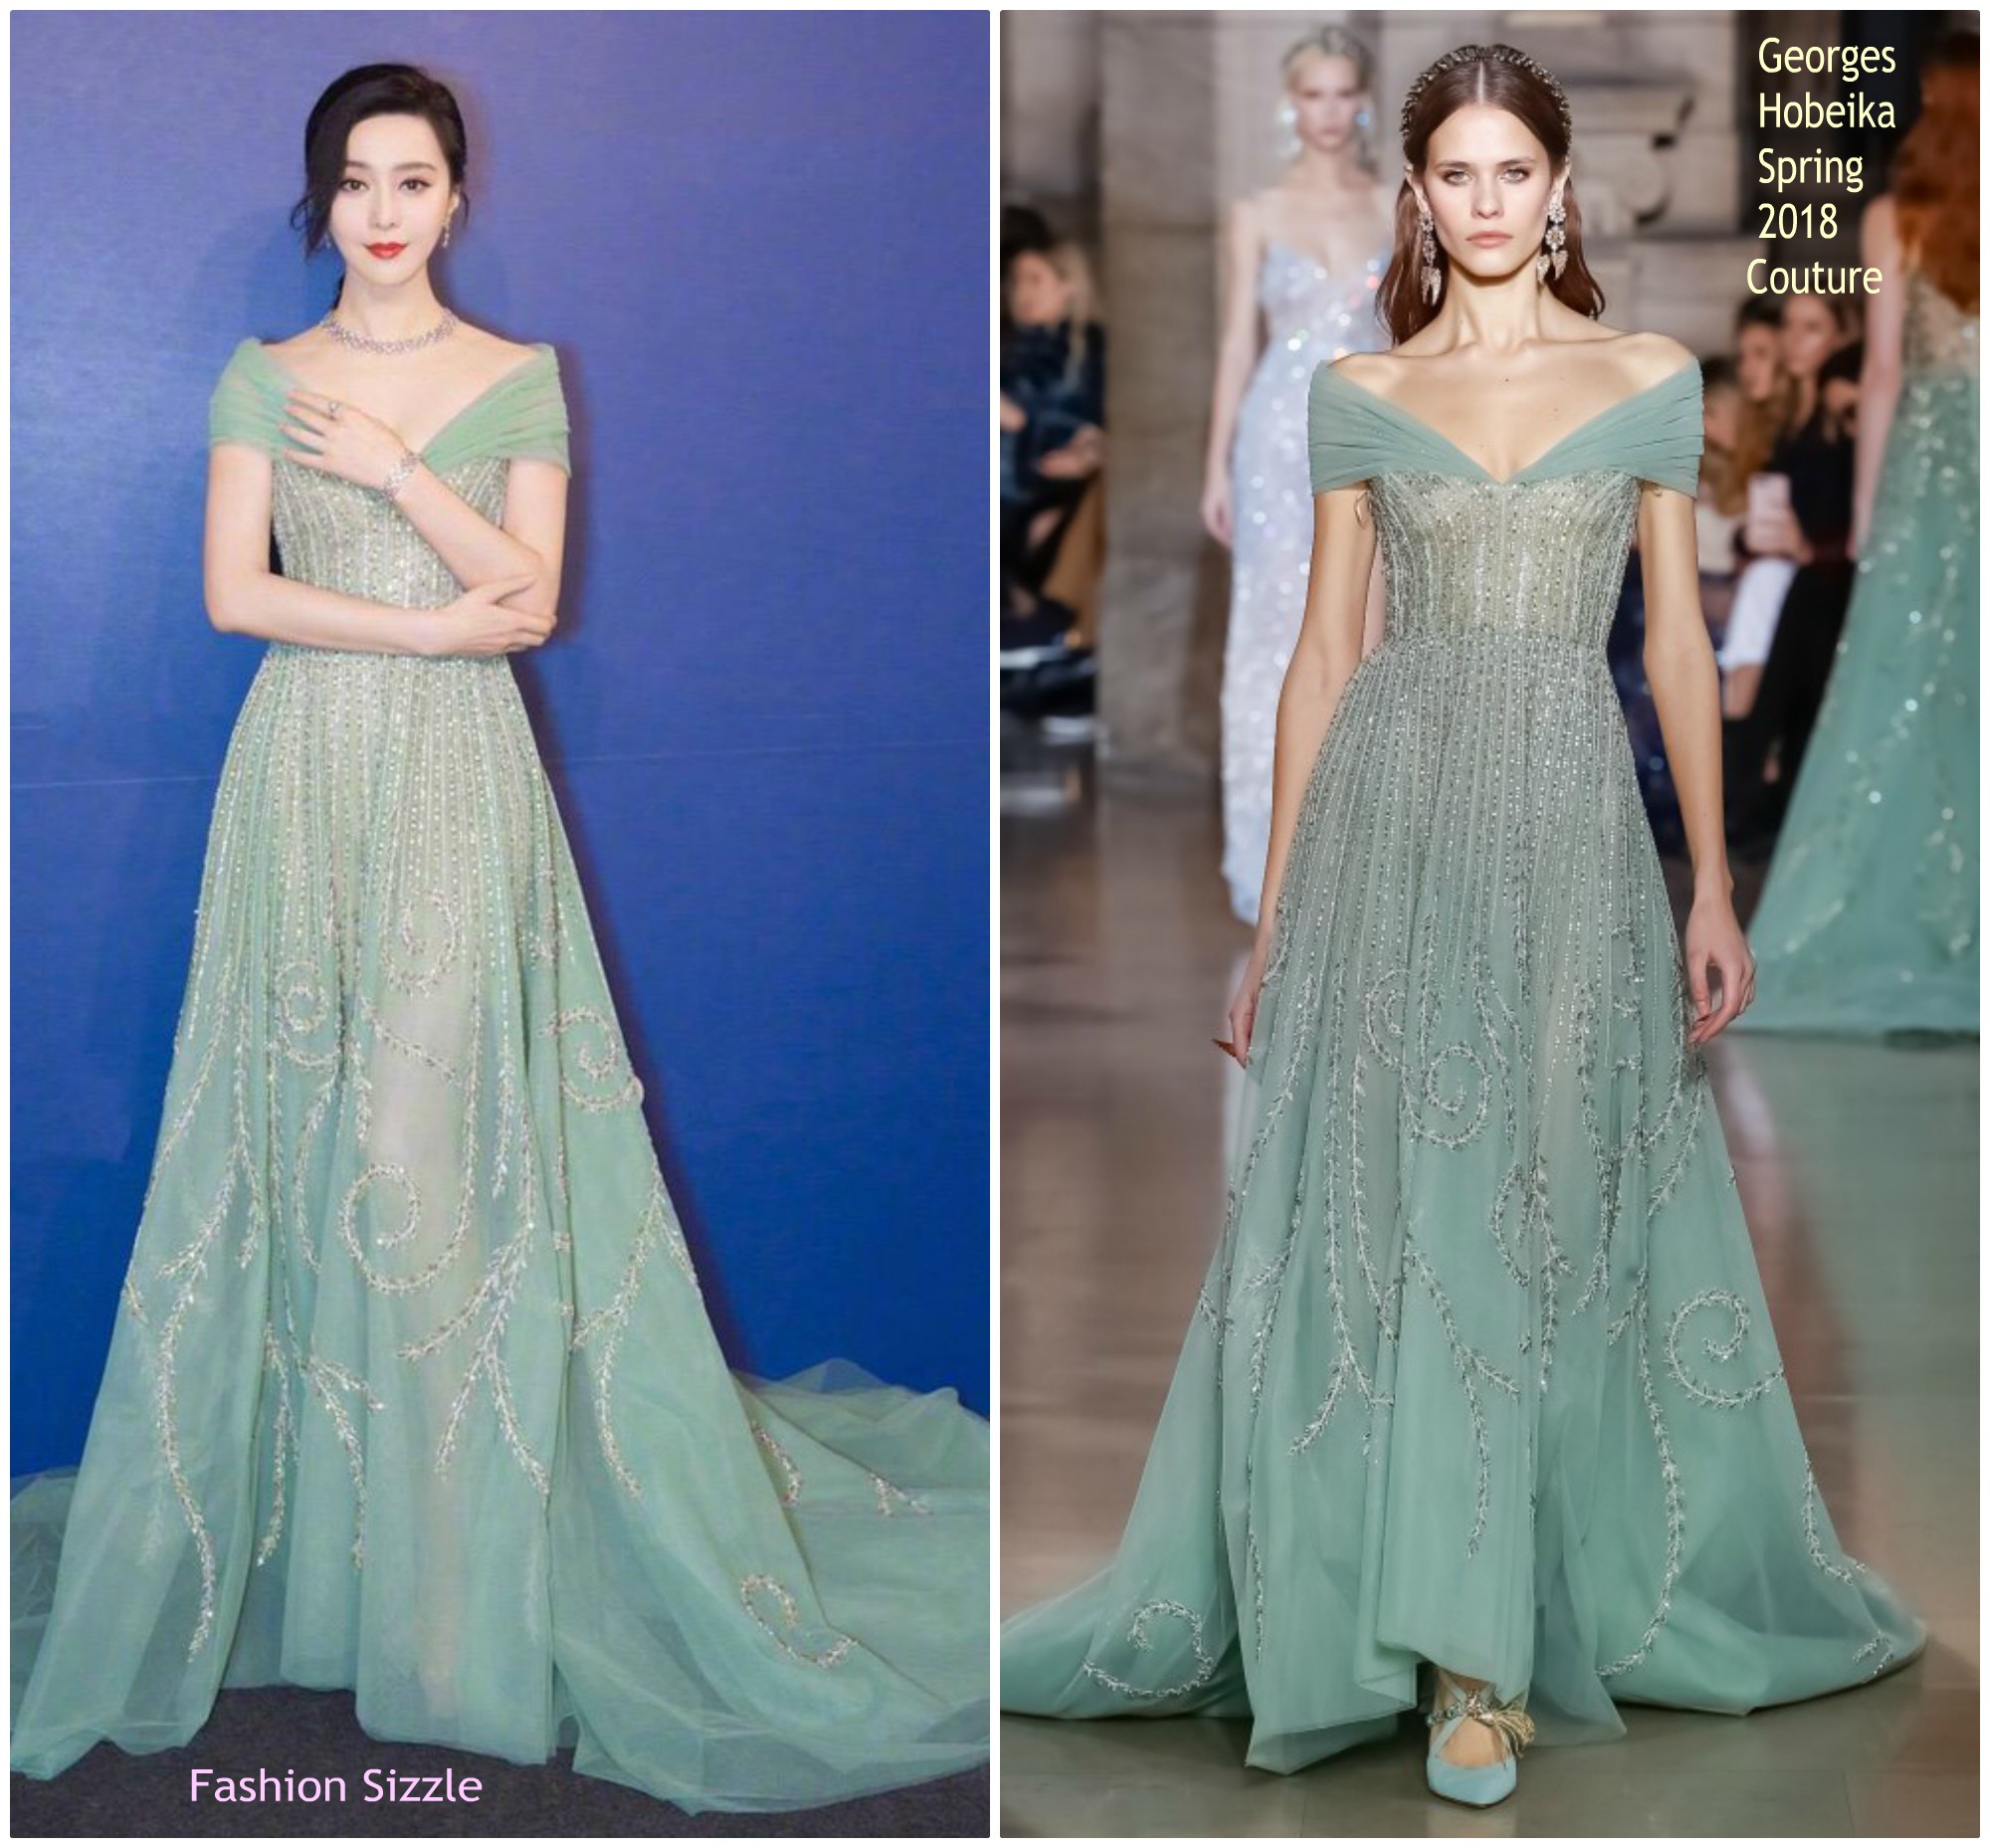 fan-bingbing-in-georges-hobeika-couture-de-beers-taiwan-event